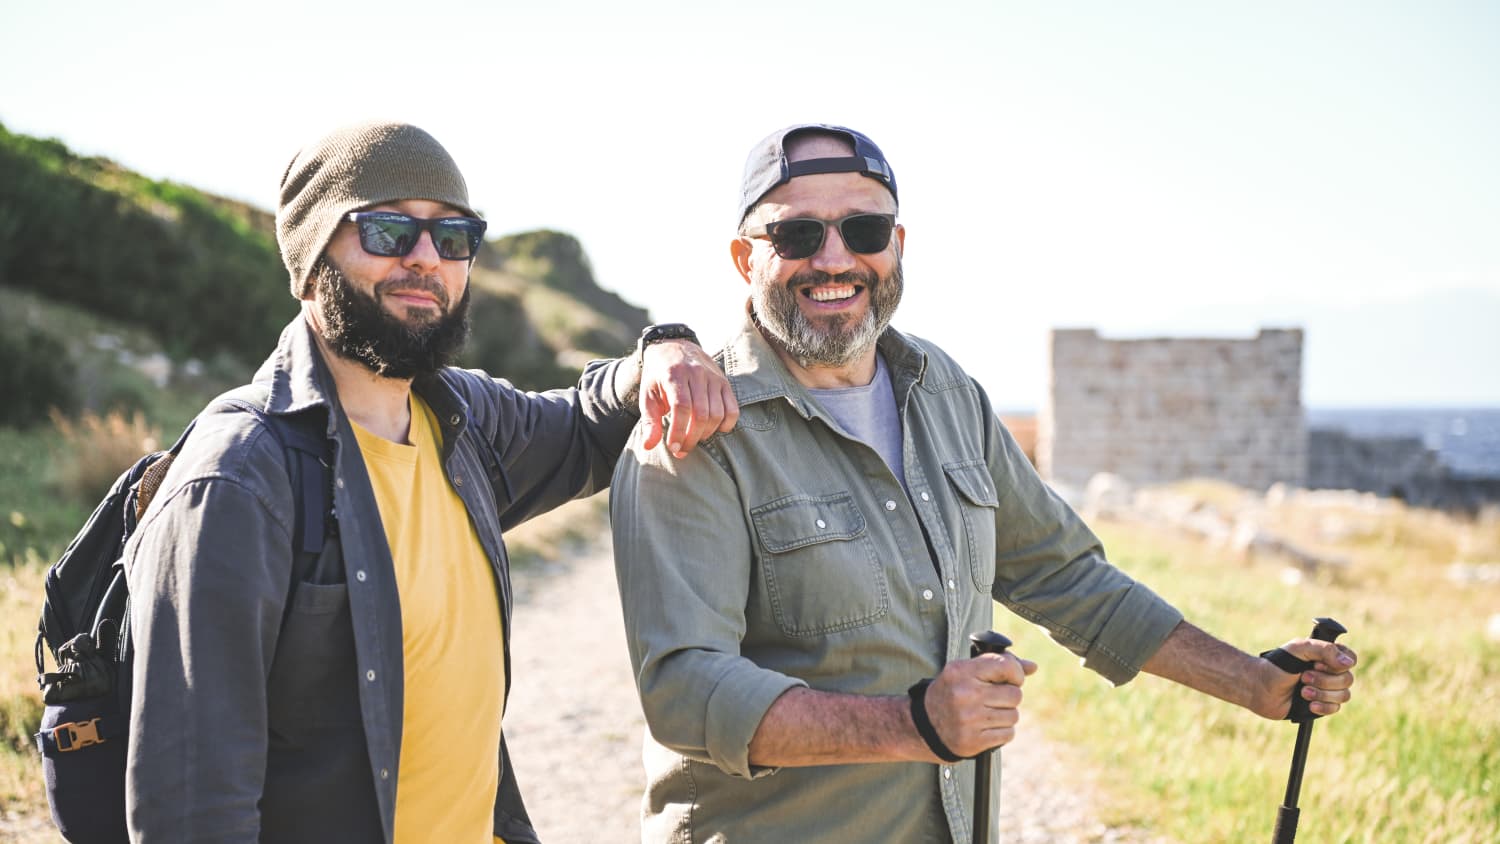 man with Transitional Cell Cancer of the Renal Pelvis and Ureter hikes with his friend